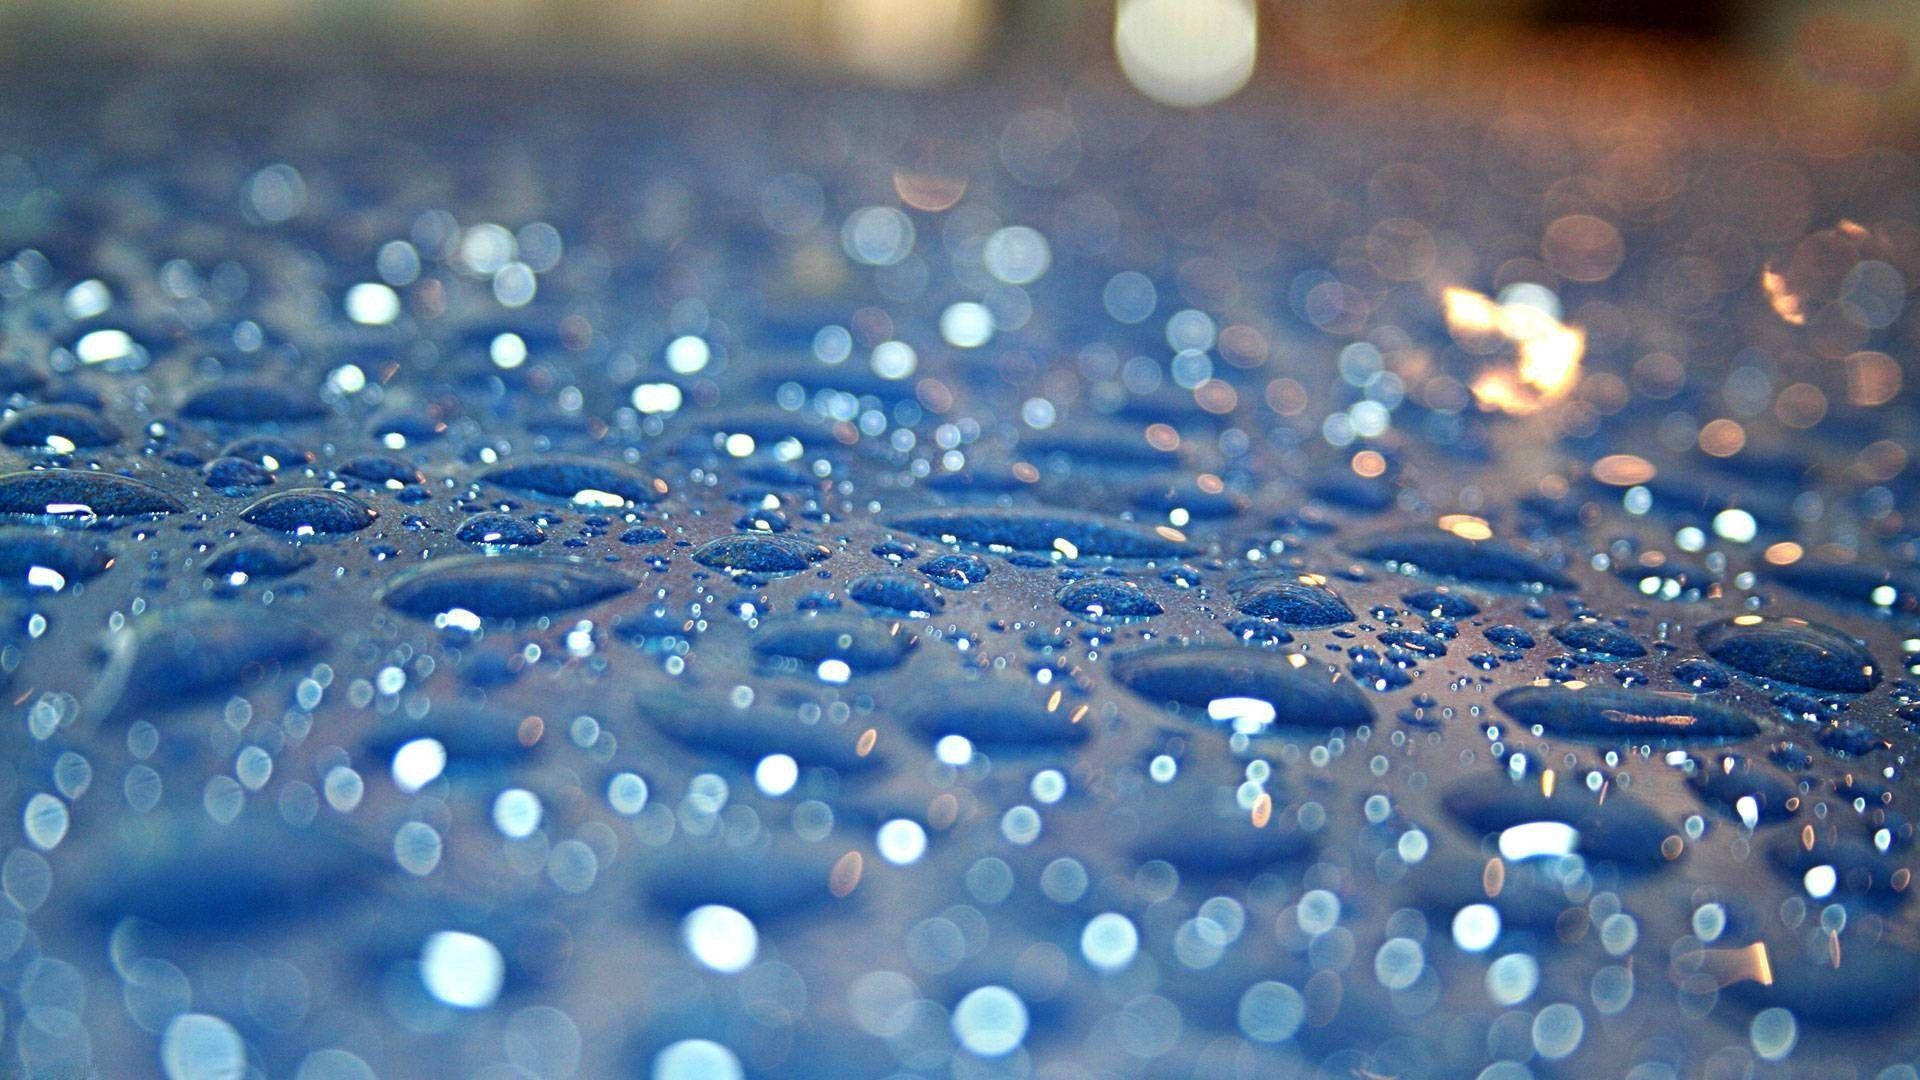 Crystal Like Raindrops On A Blue Surface Background